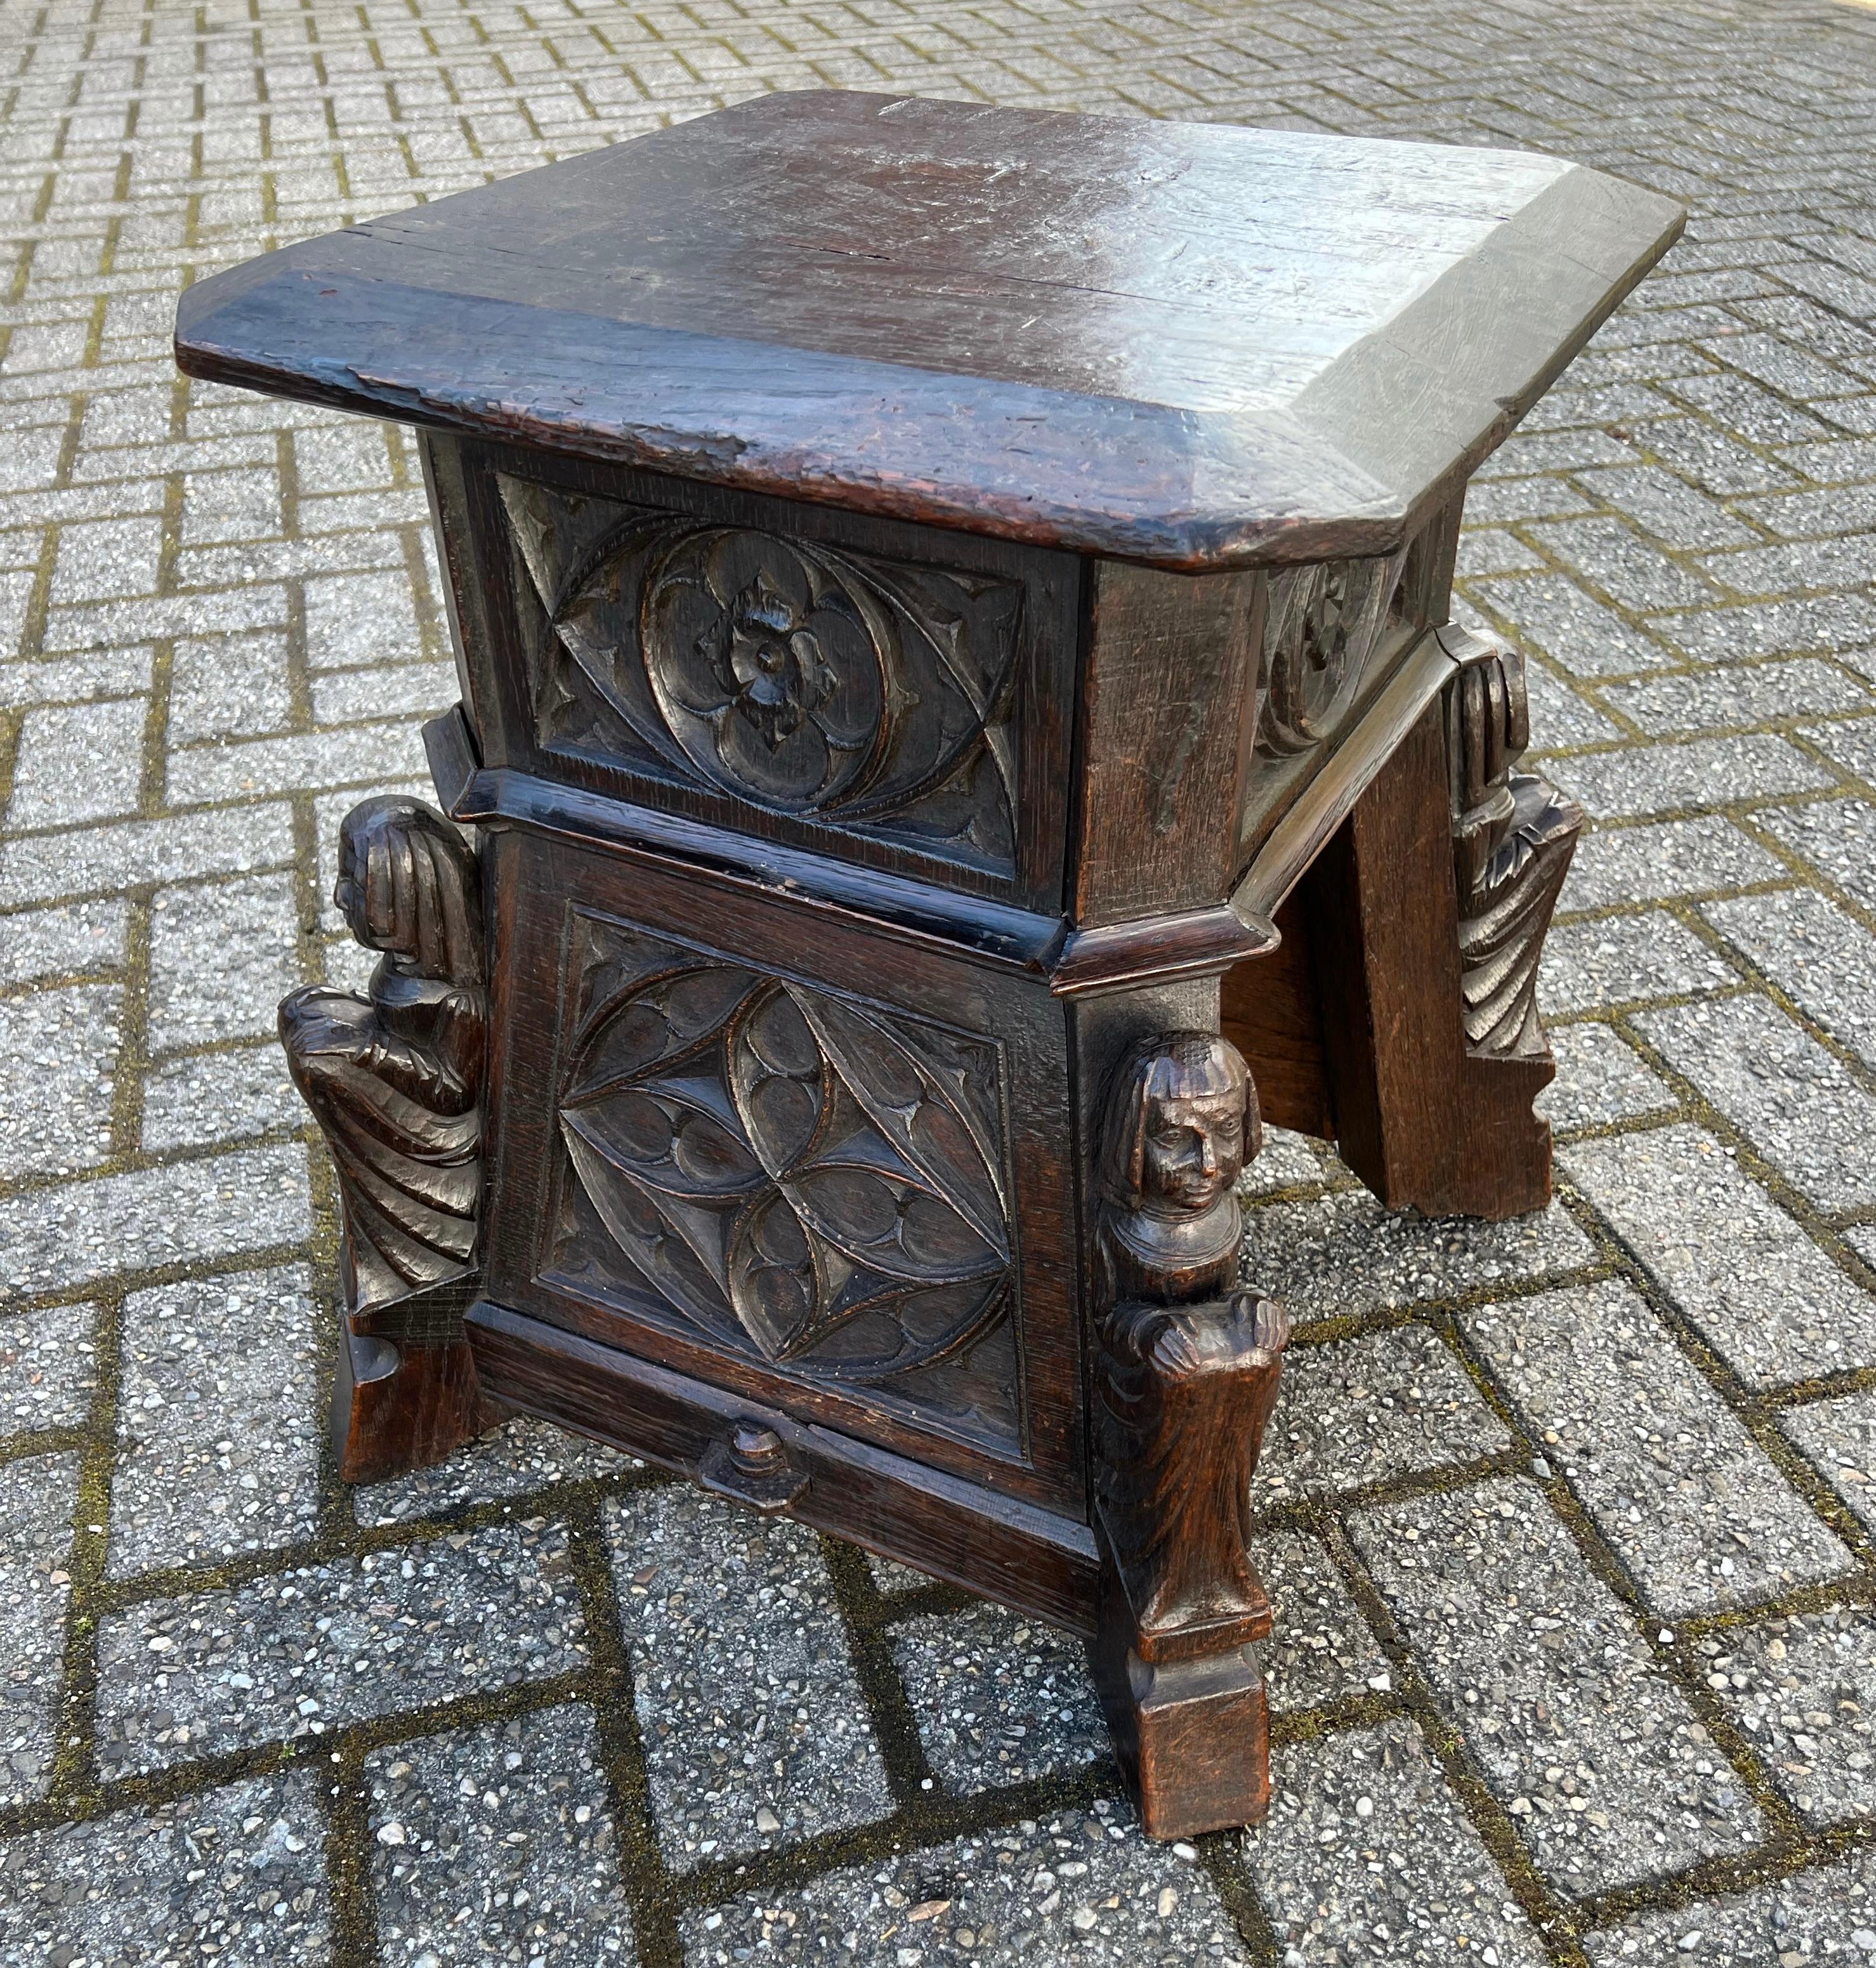 Truly medieval looking, antique sculptural stool or table in the Gothic Style.

Thanks to its honest wear of having been used for well over a century, this Gothic Revival stool very much looks like a 17th or 18th century specimen. This stained oak